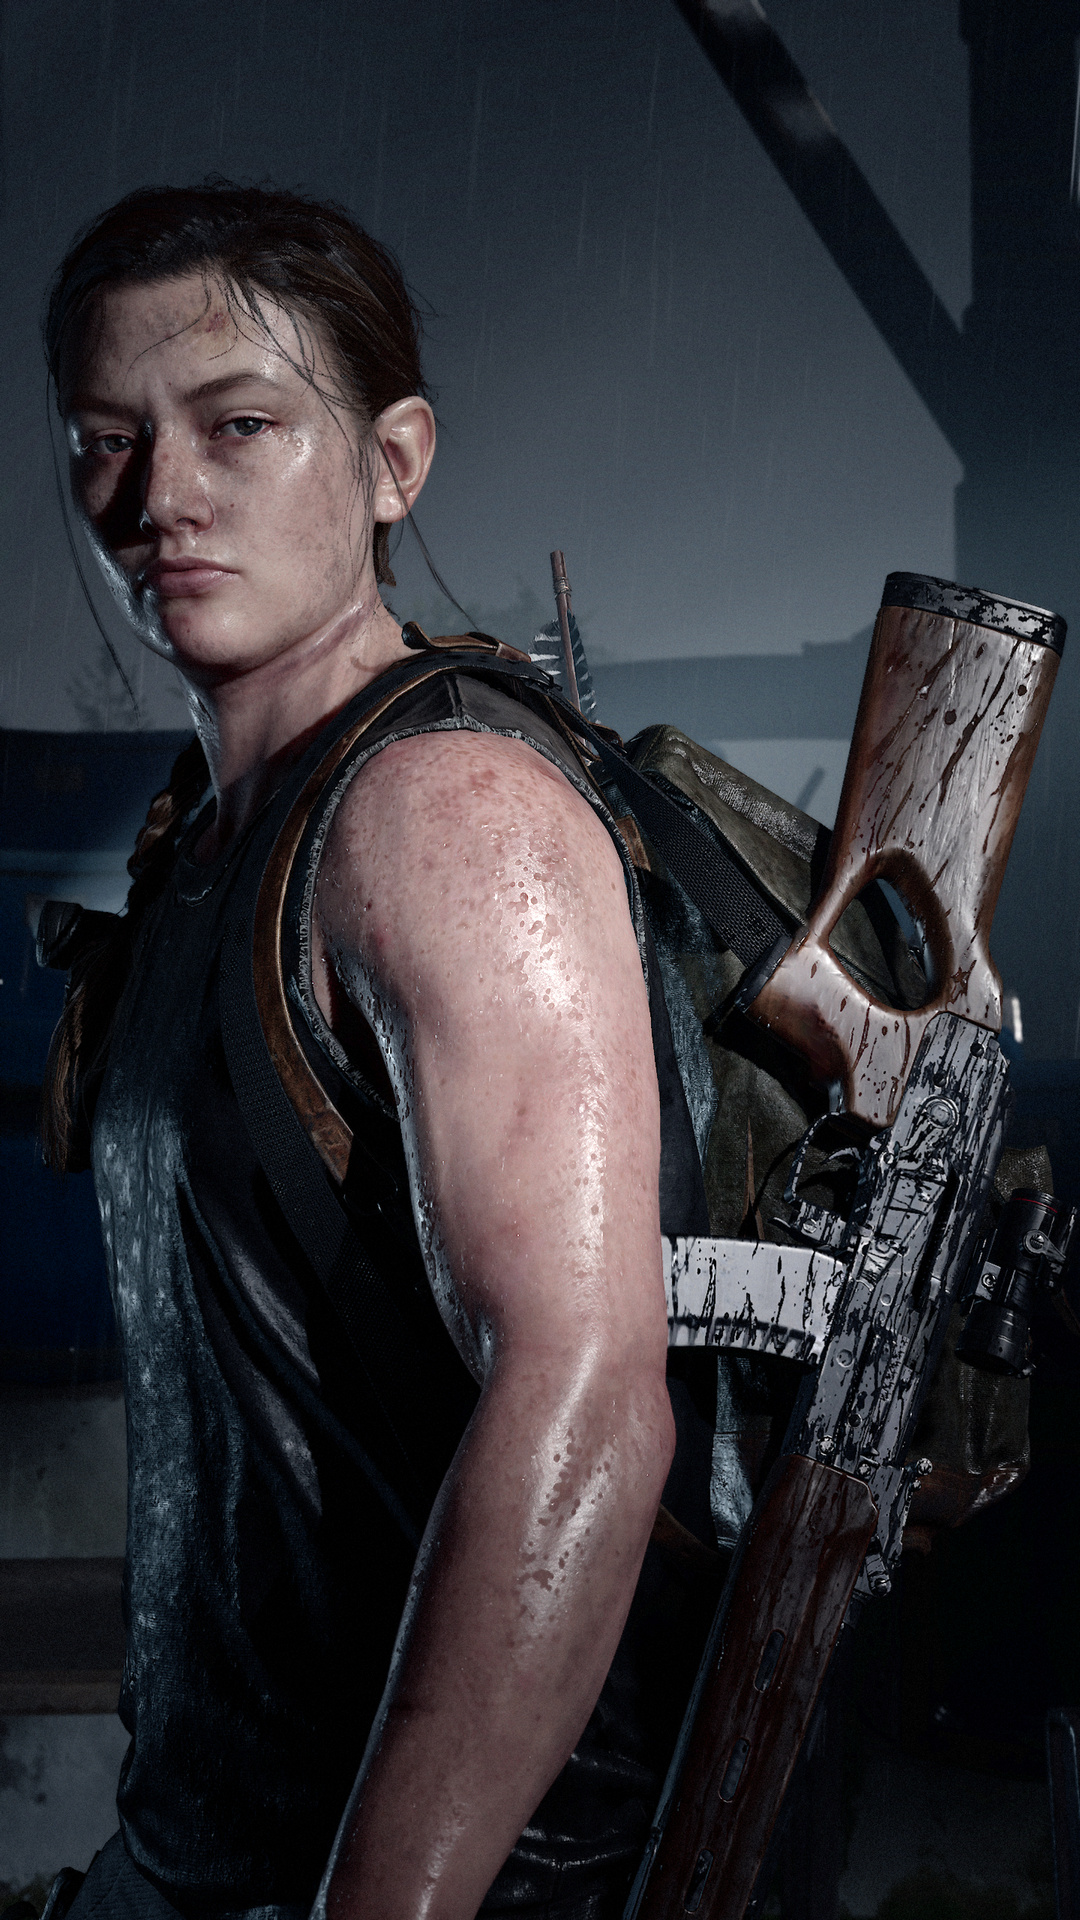 Wallpaper Search: #Abby (The Last of Us) 